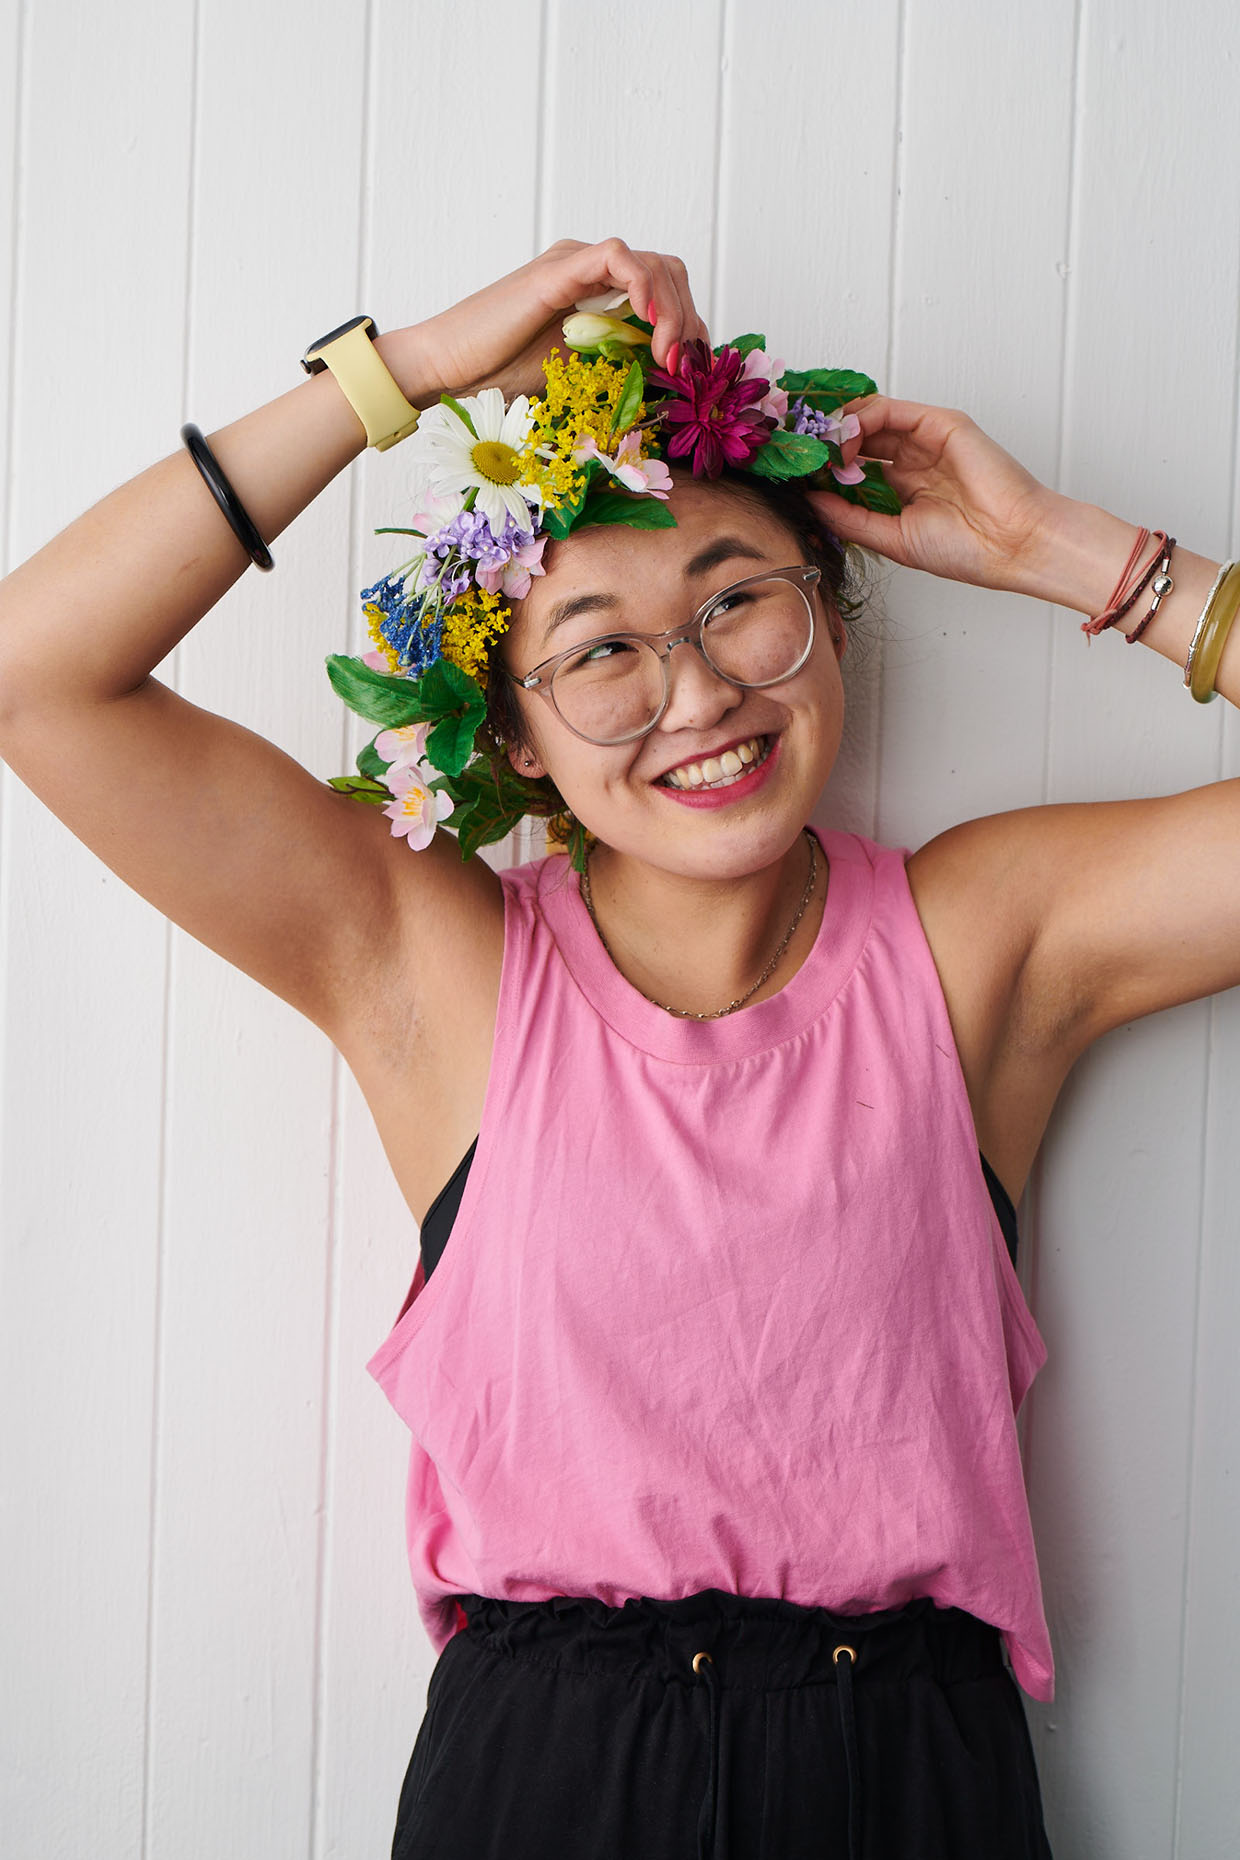 How to make a flower crown tutorial